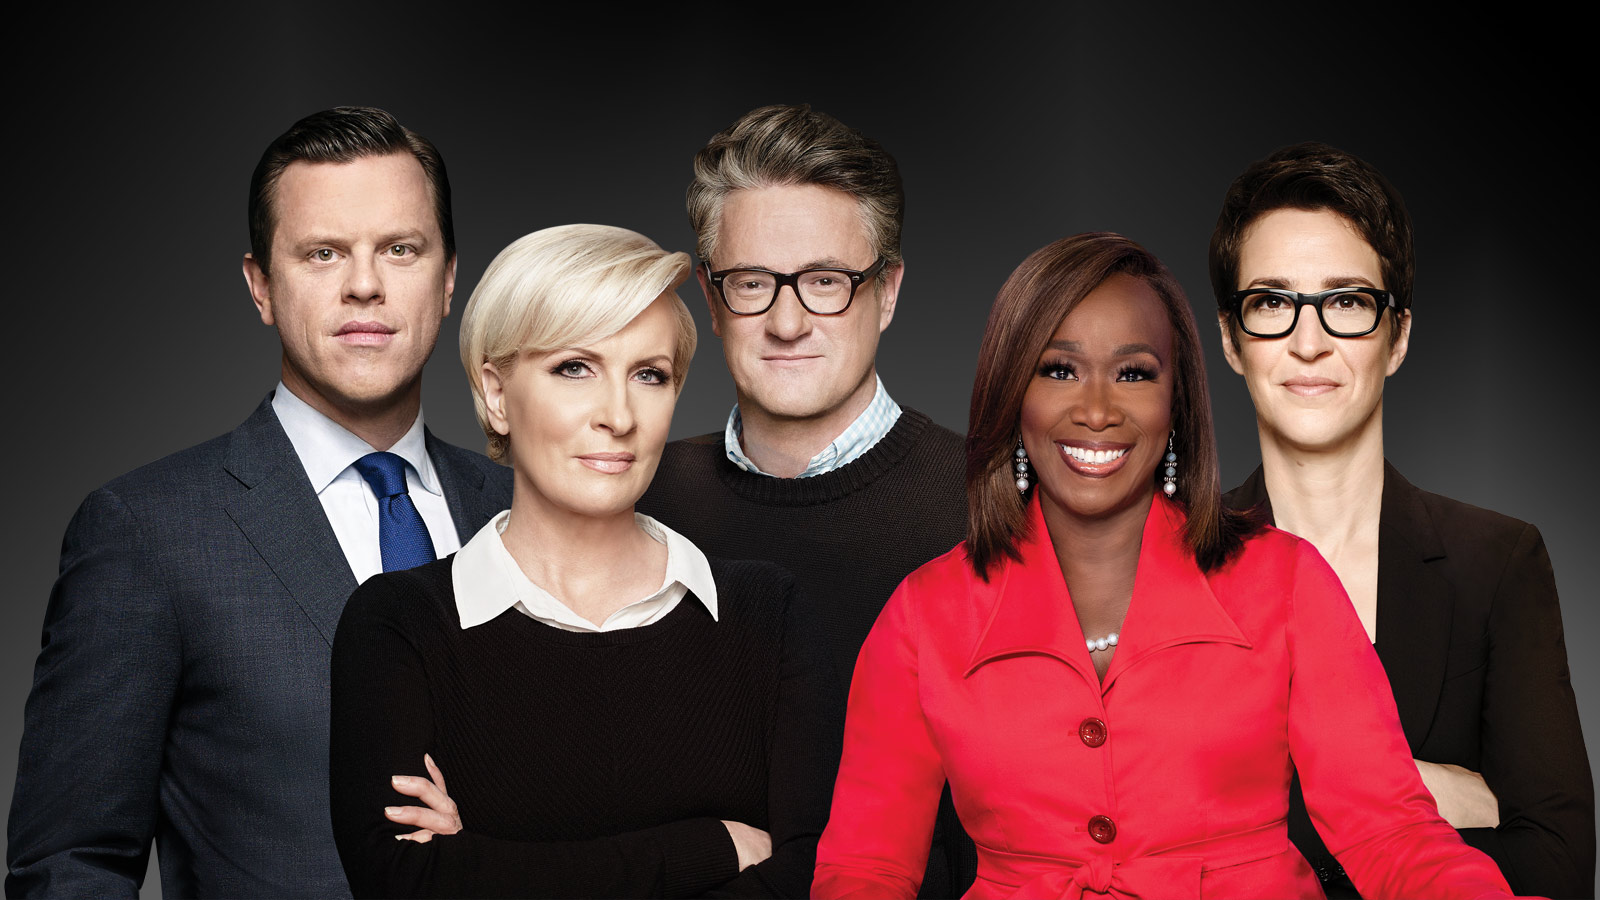 new shows on msnbc